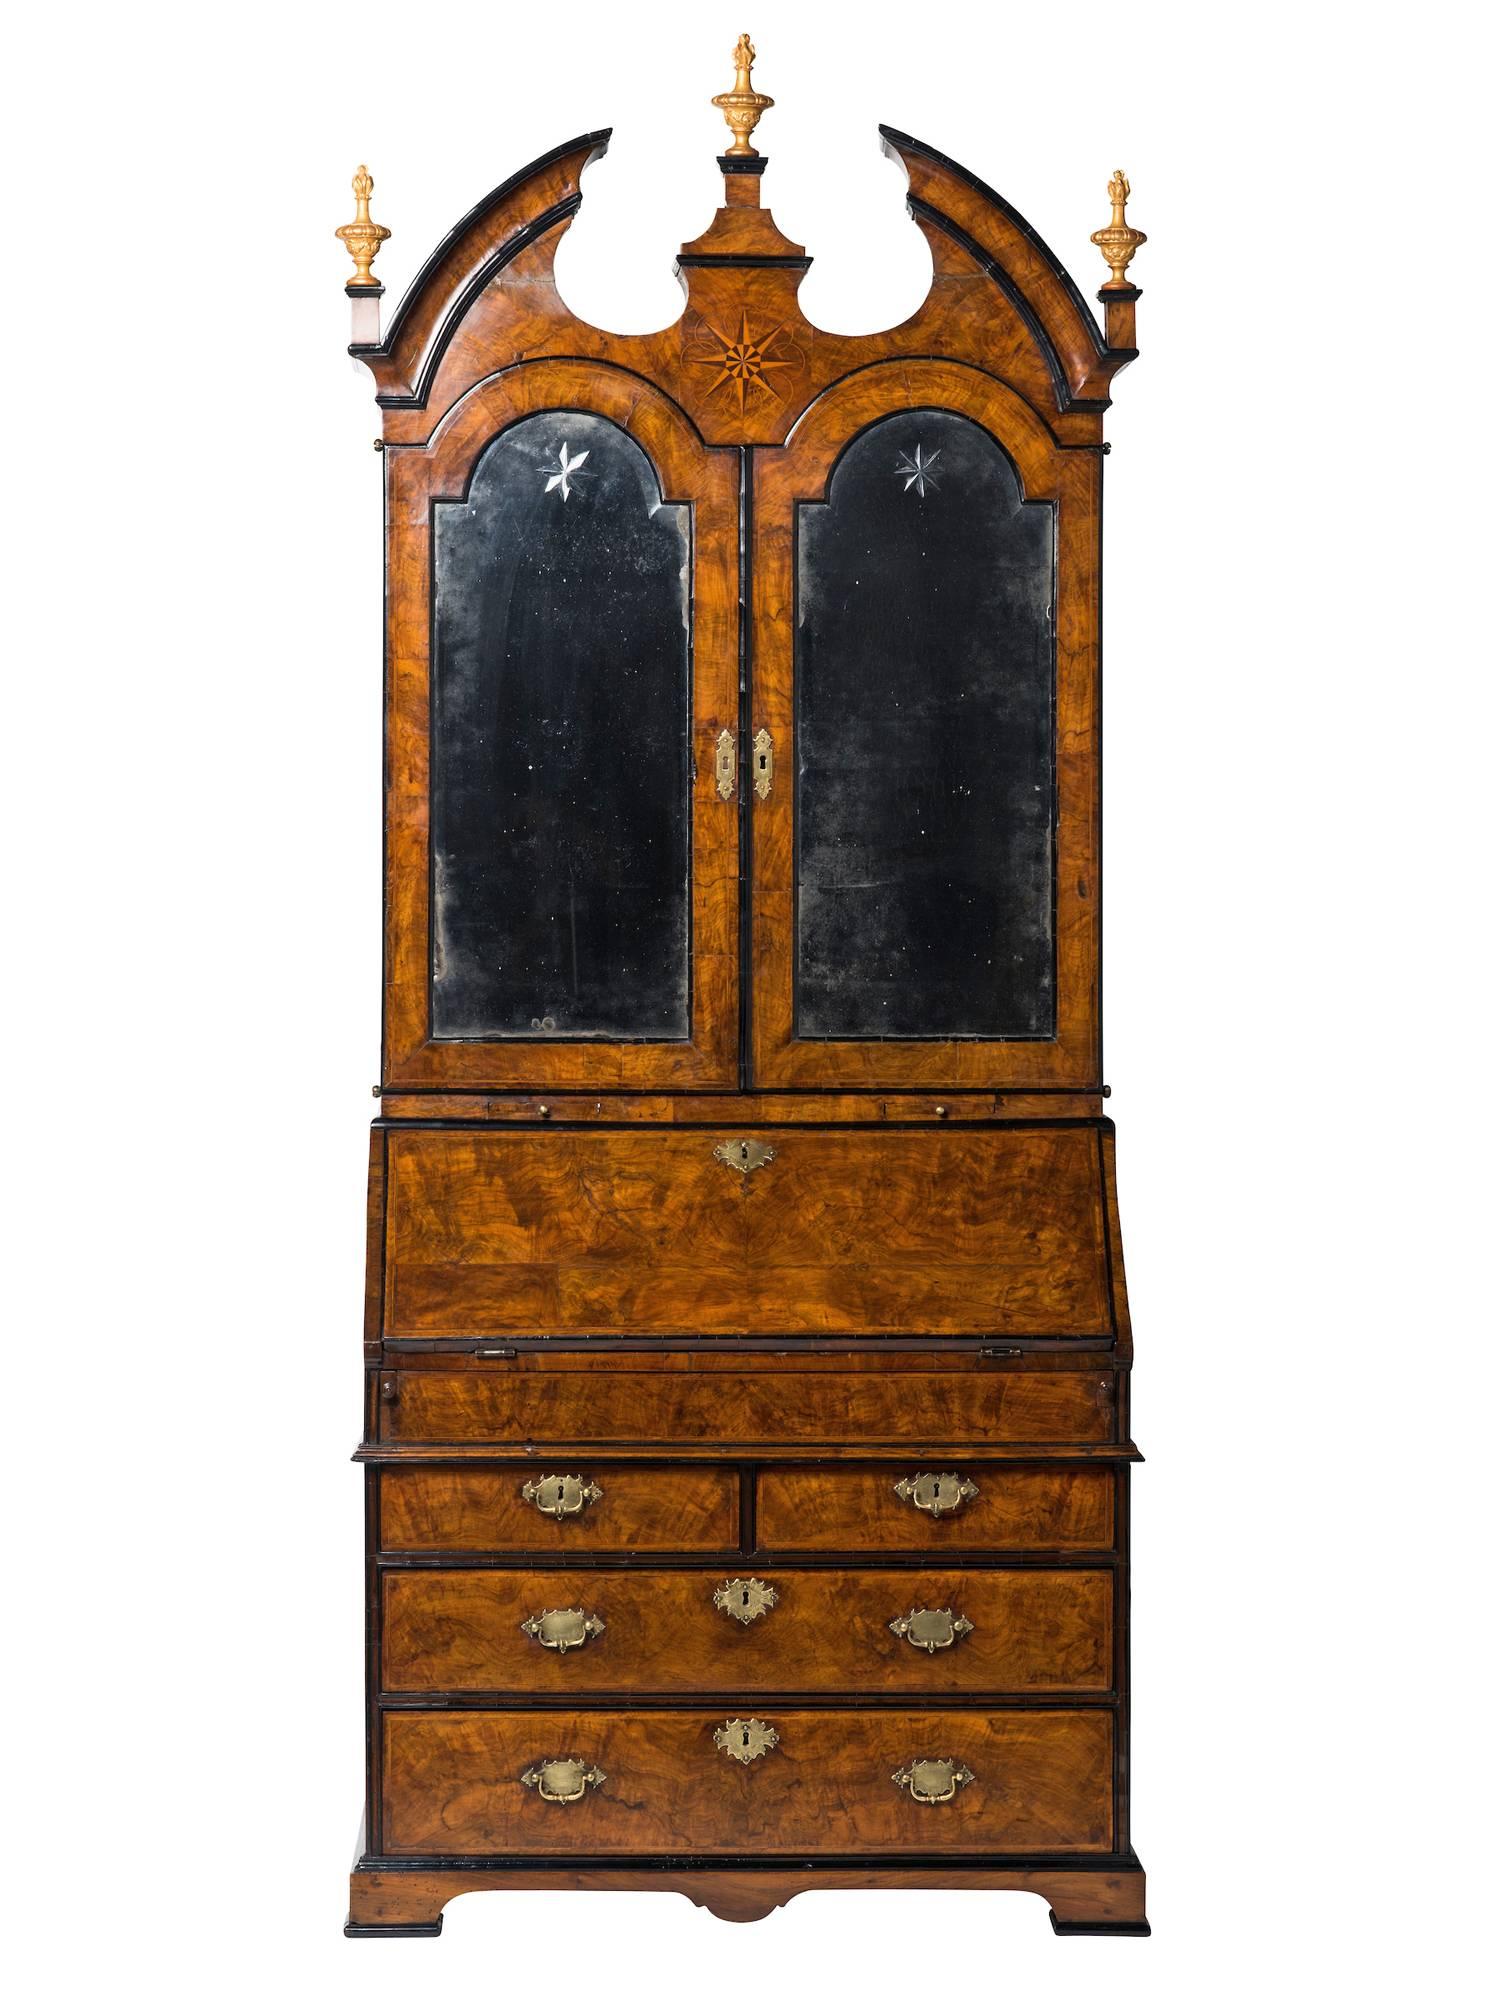 The upper part having a swan’s neck pediment centered by an inlaid star medallion and surmounted by gilt finials, over a pair of mirror-fronted doors opening to a fully fitted interior of small drawers, folio slides, pigeon holes and secret